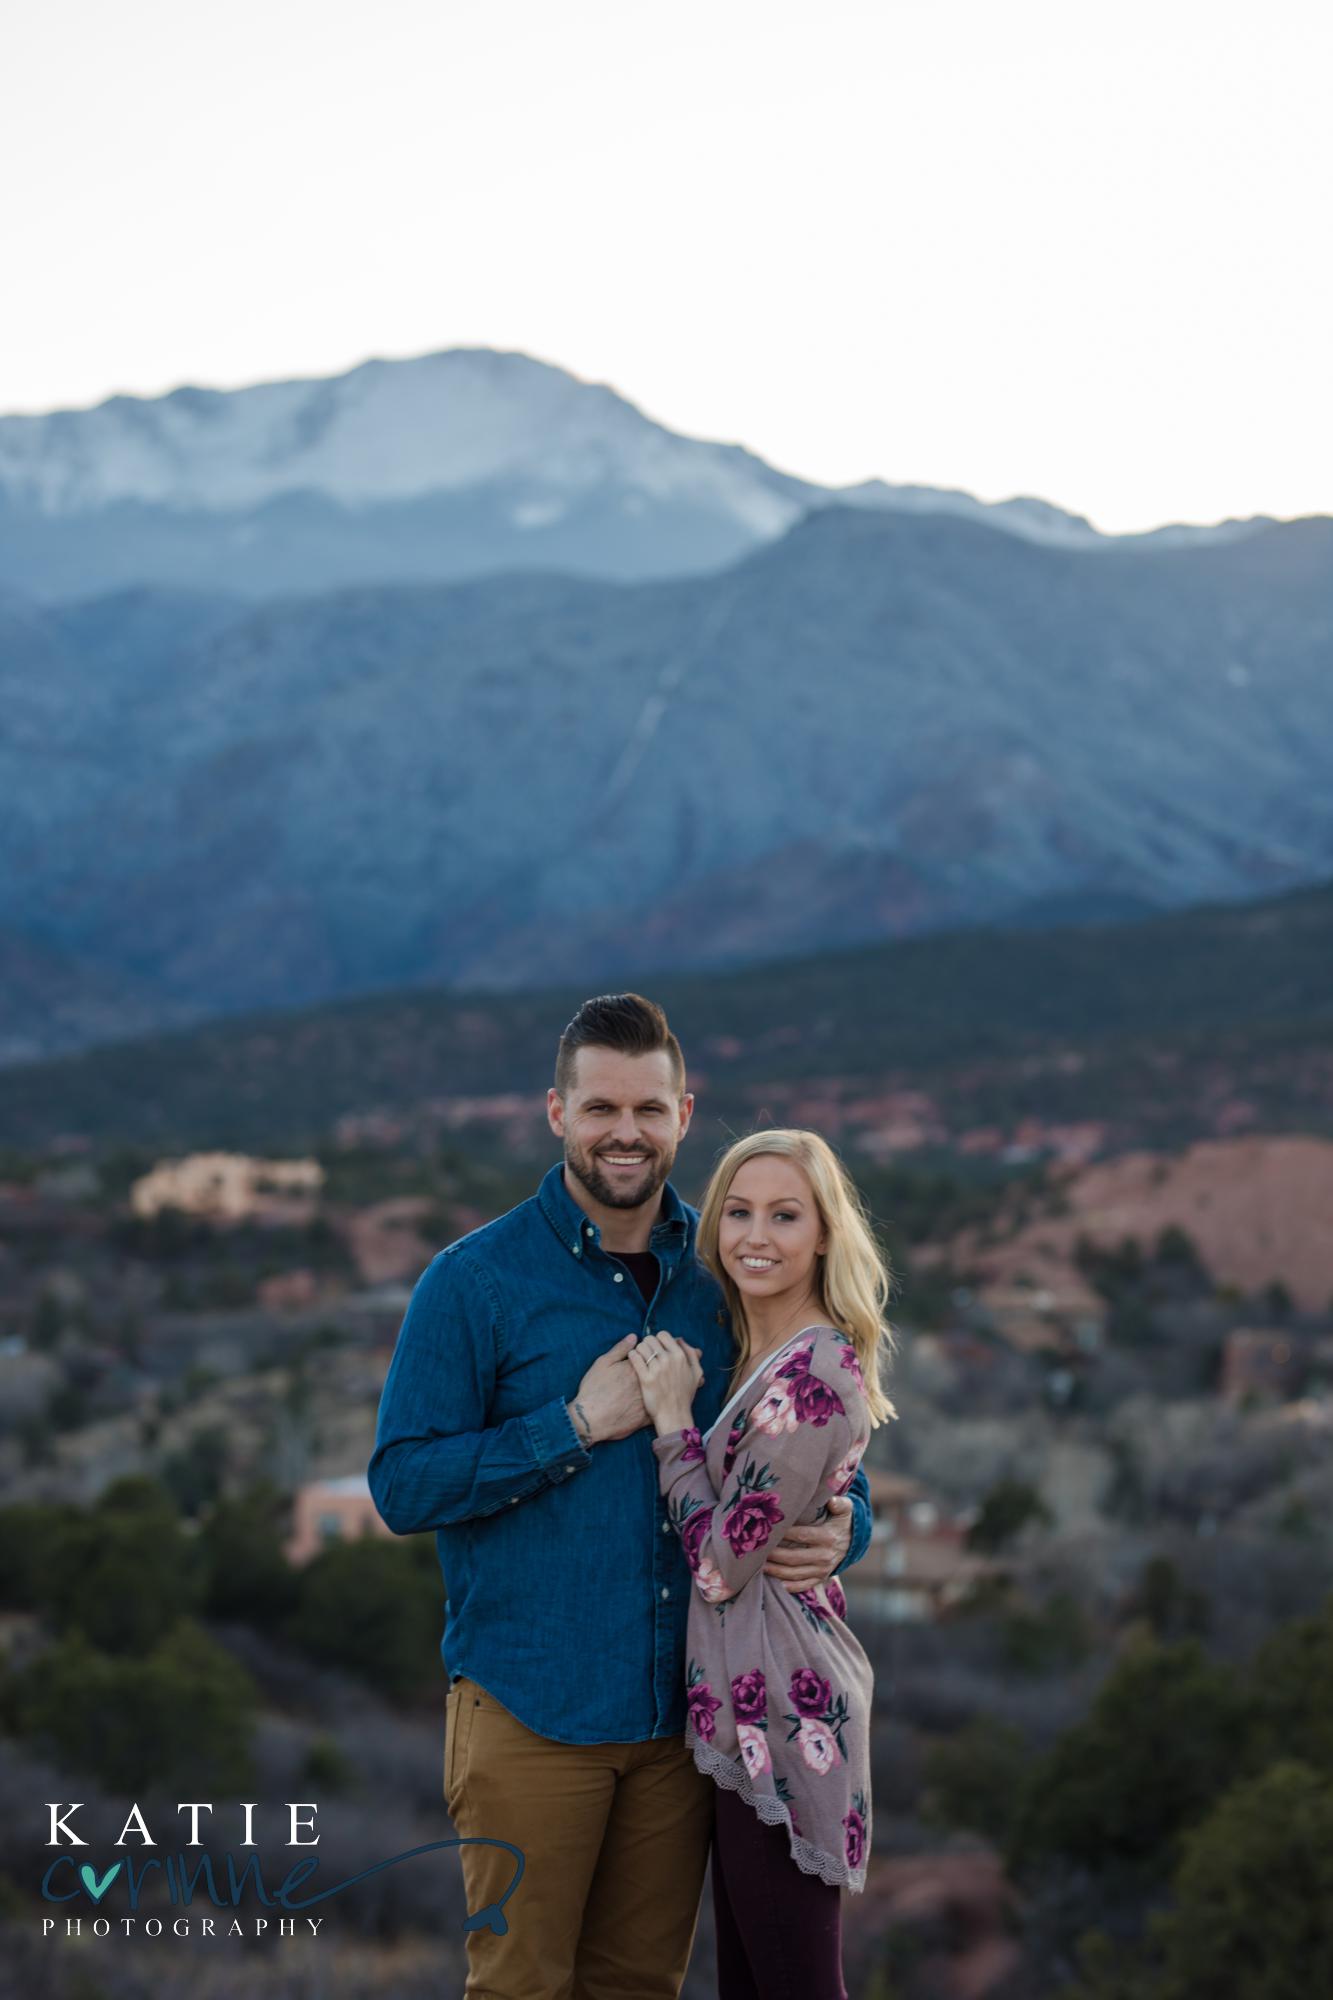 Couple celebrates engagement in front of mountains